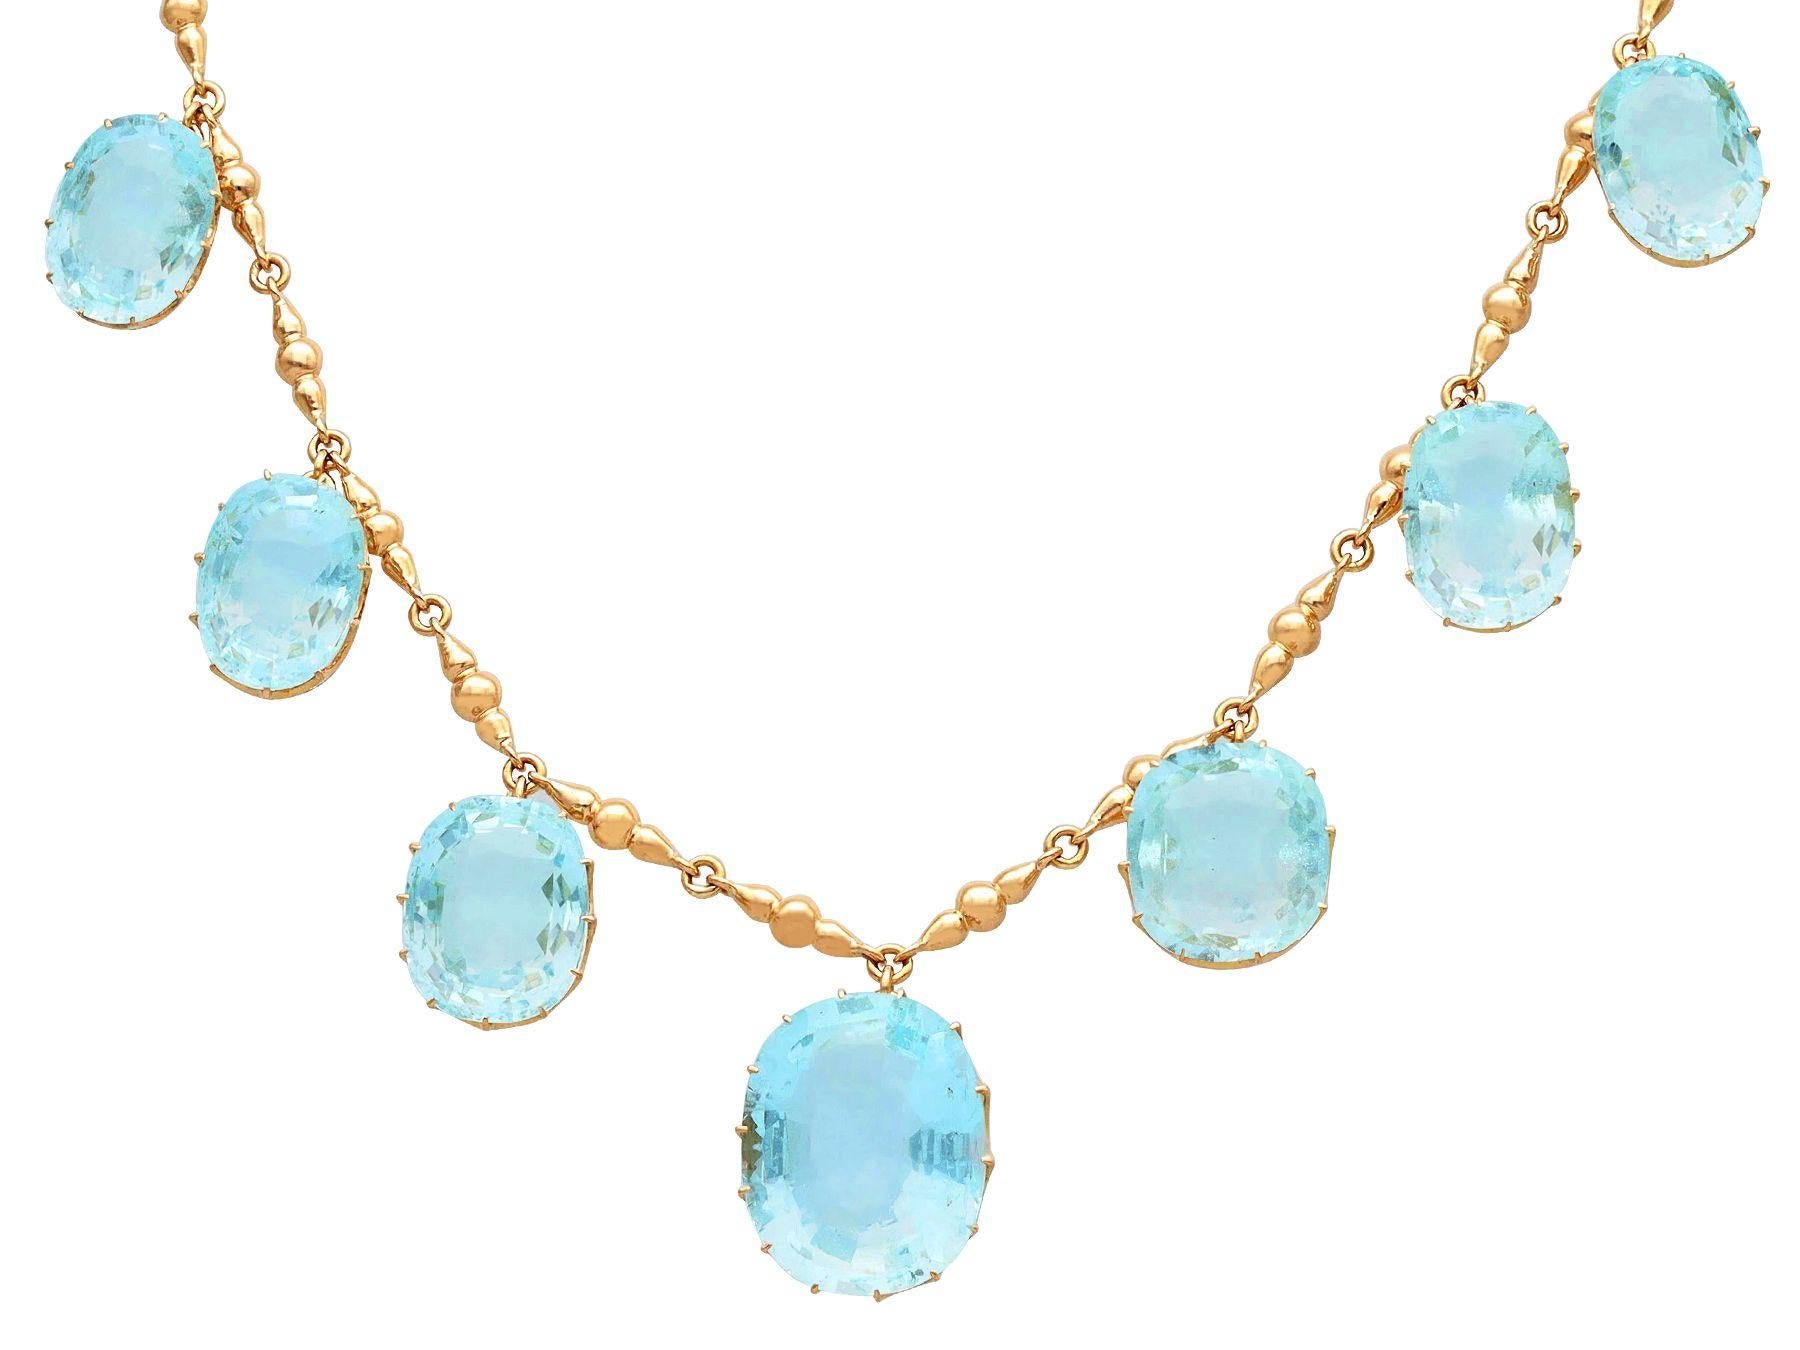 A stunning, fine and impressive 104.26 carat aquamarine and 18 karat rose gold necklace; part of our diverse antique jewelry collections.

This stunning, fine and impressive antique necklace has been crafted in 18k rose gold.

The antique necklace